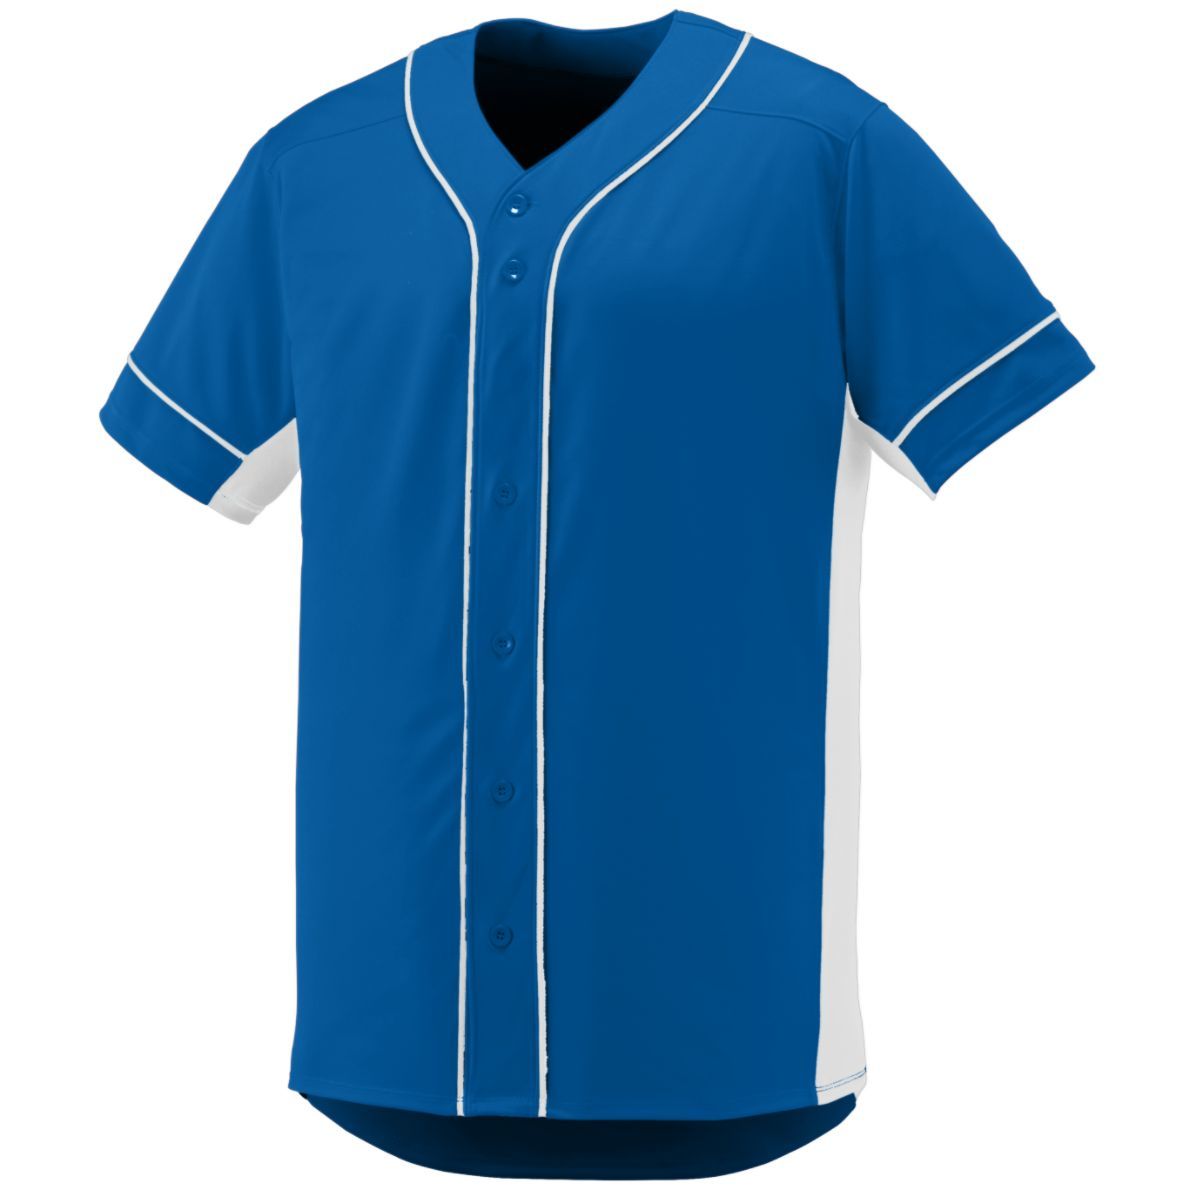 Augusta Sportswear Youth Slugger Jersey in Royal/White  -Part of the Youth, Youth-Jersey, Augusta-Products, Baseball, Shirts, All-Sports, All-Sports-1 product lines at KanaleyCreations.com